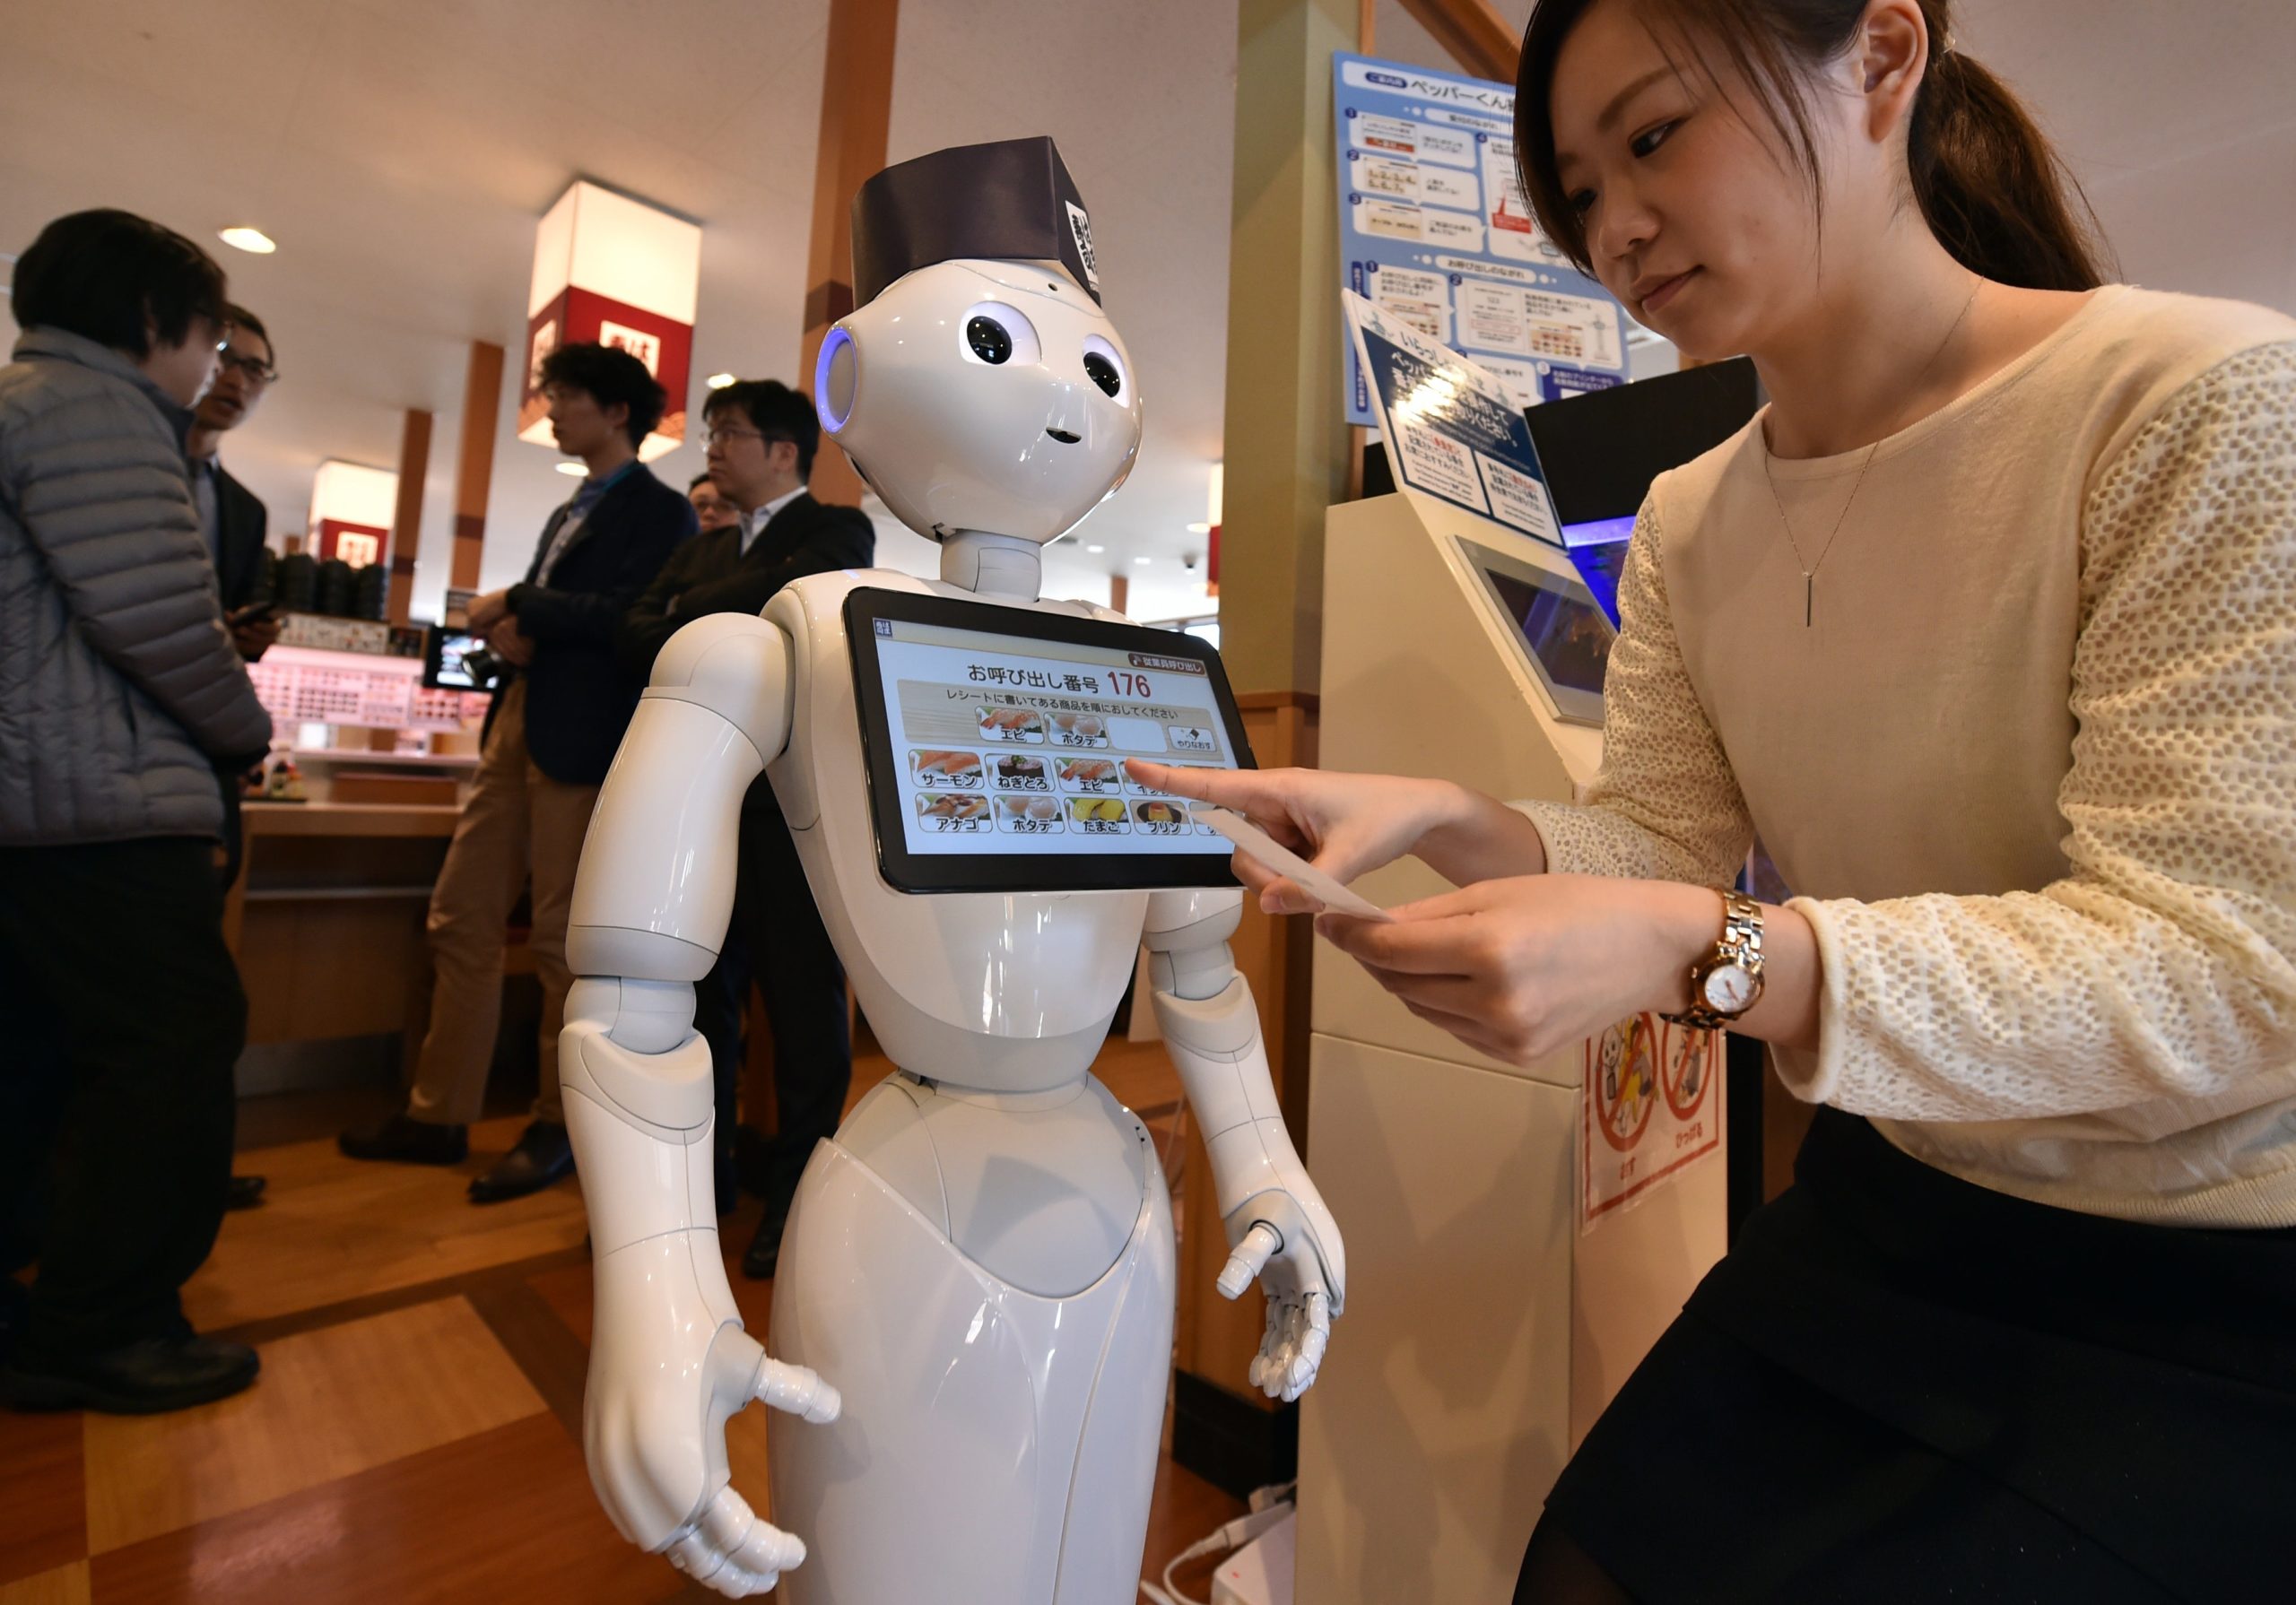 An employee of sushi restaurant Hamazushi interacts with Pepper during a press preview in Saitama, Japan on February 2, 2017. (Photo: Kazuhiro Nogi/AFP, Getty Images)